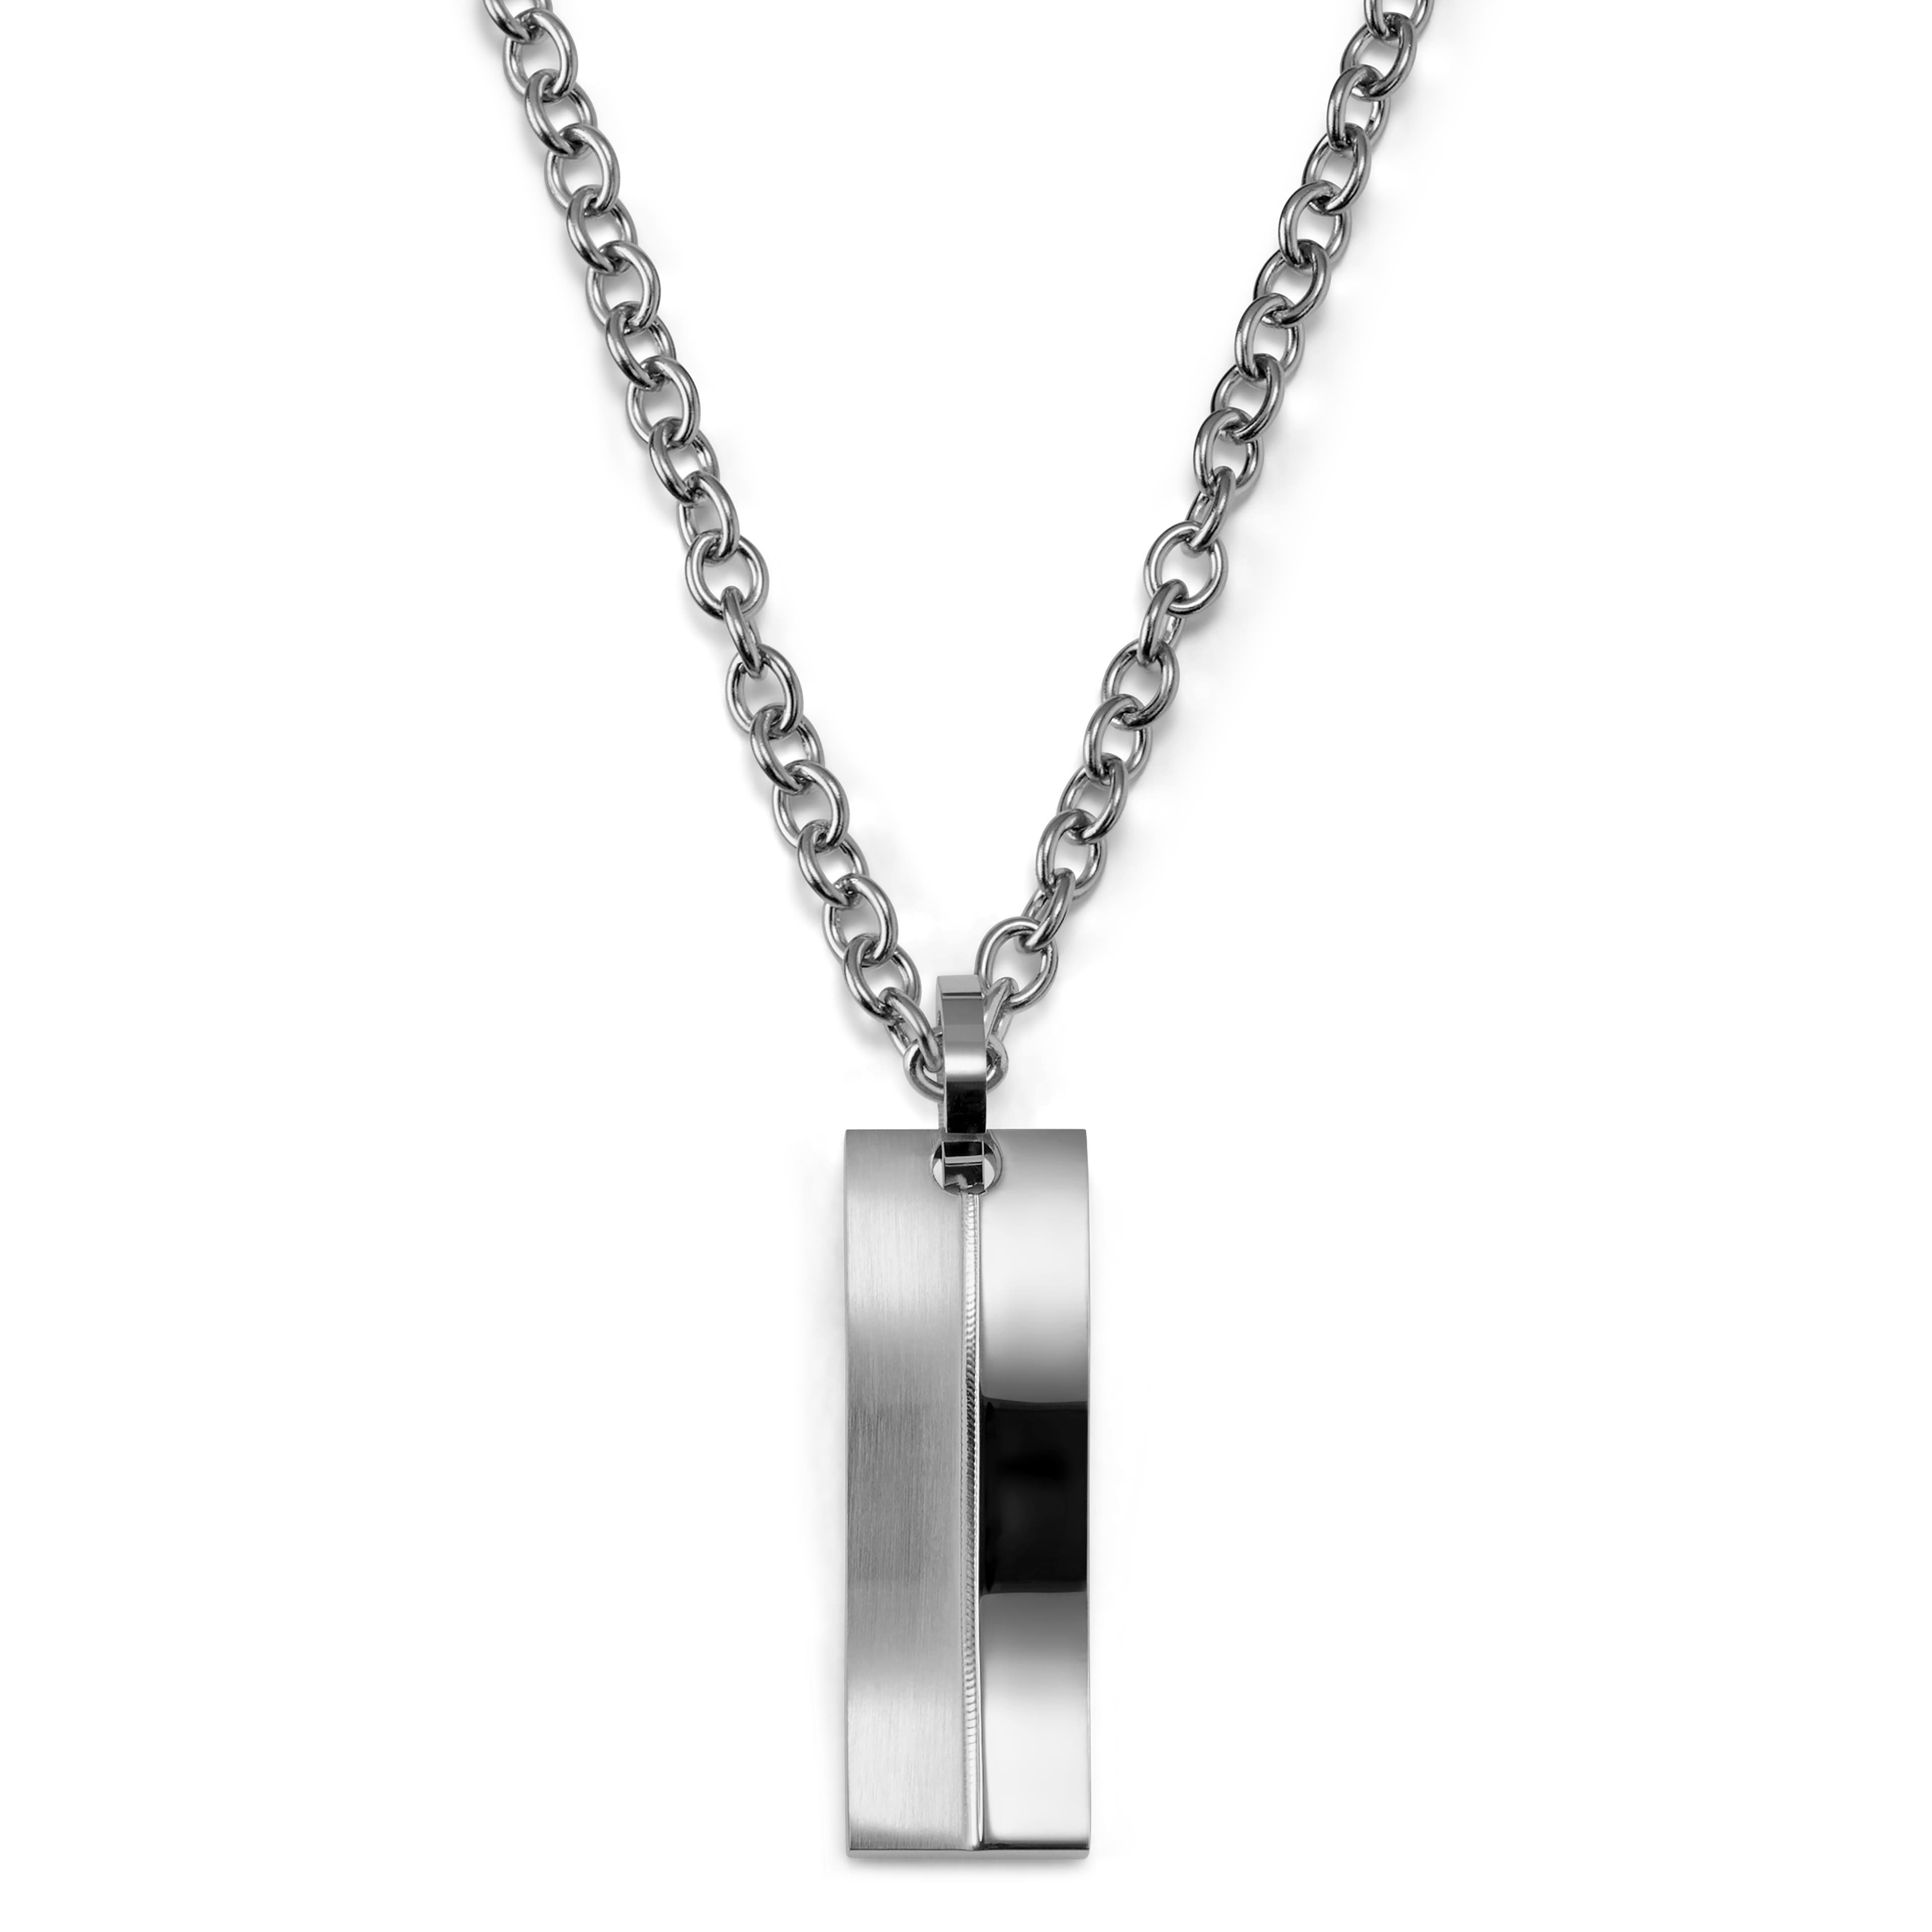 Silver-Tone Stainless Steel Curved Plate Cable Chain Necklace